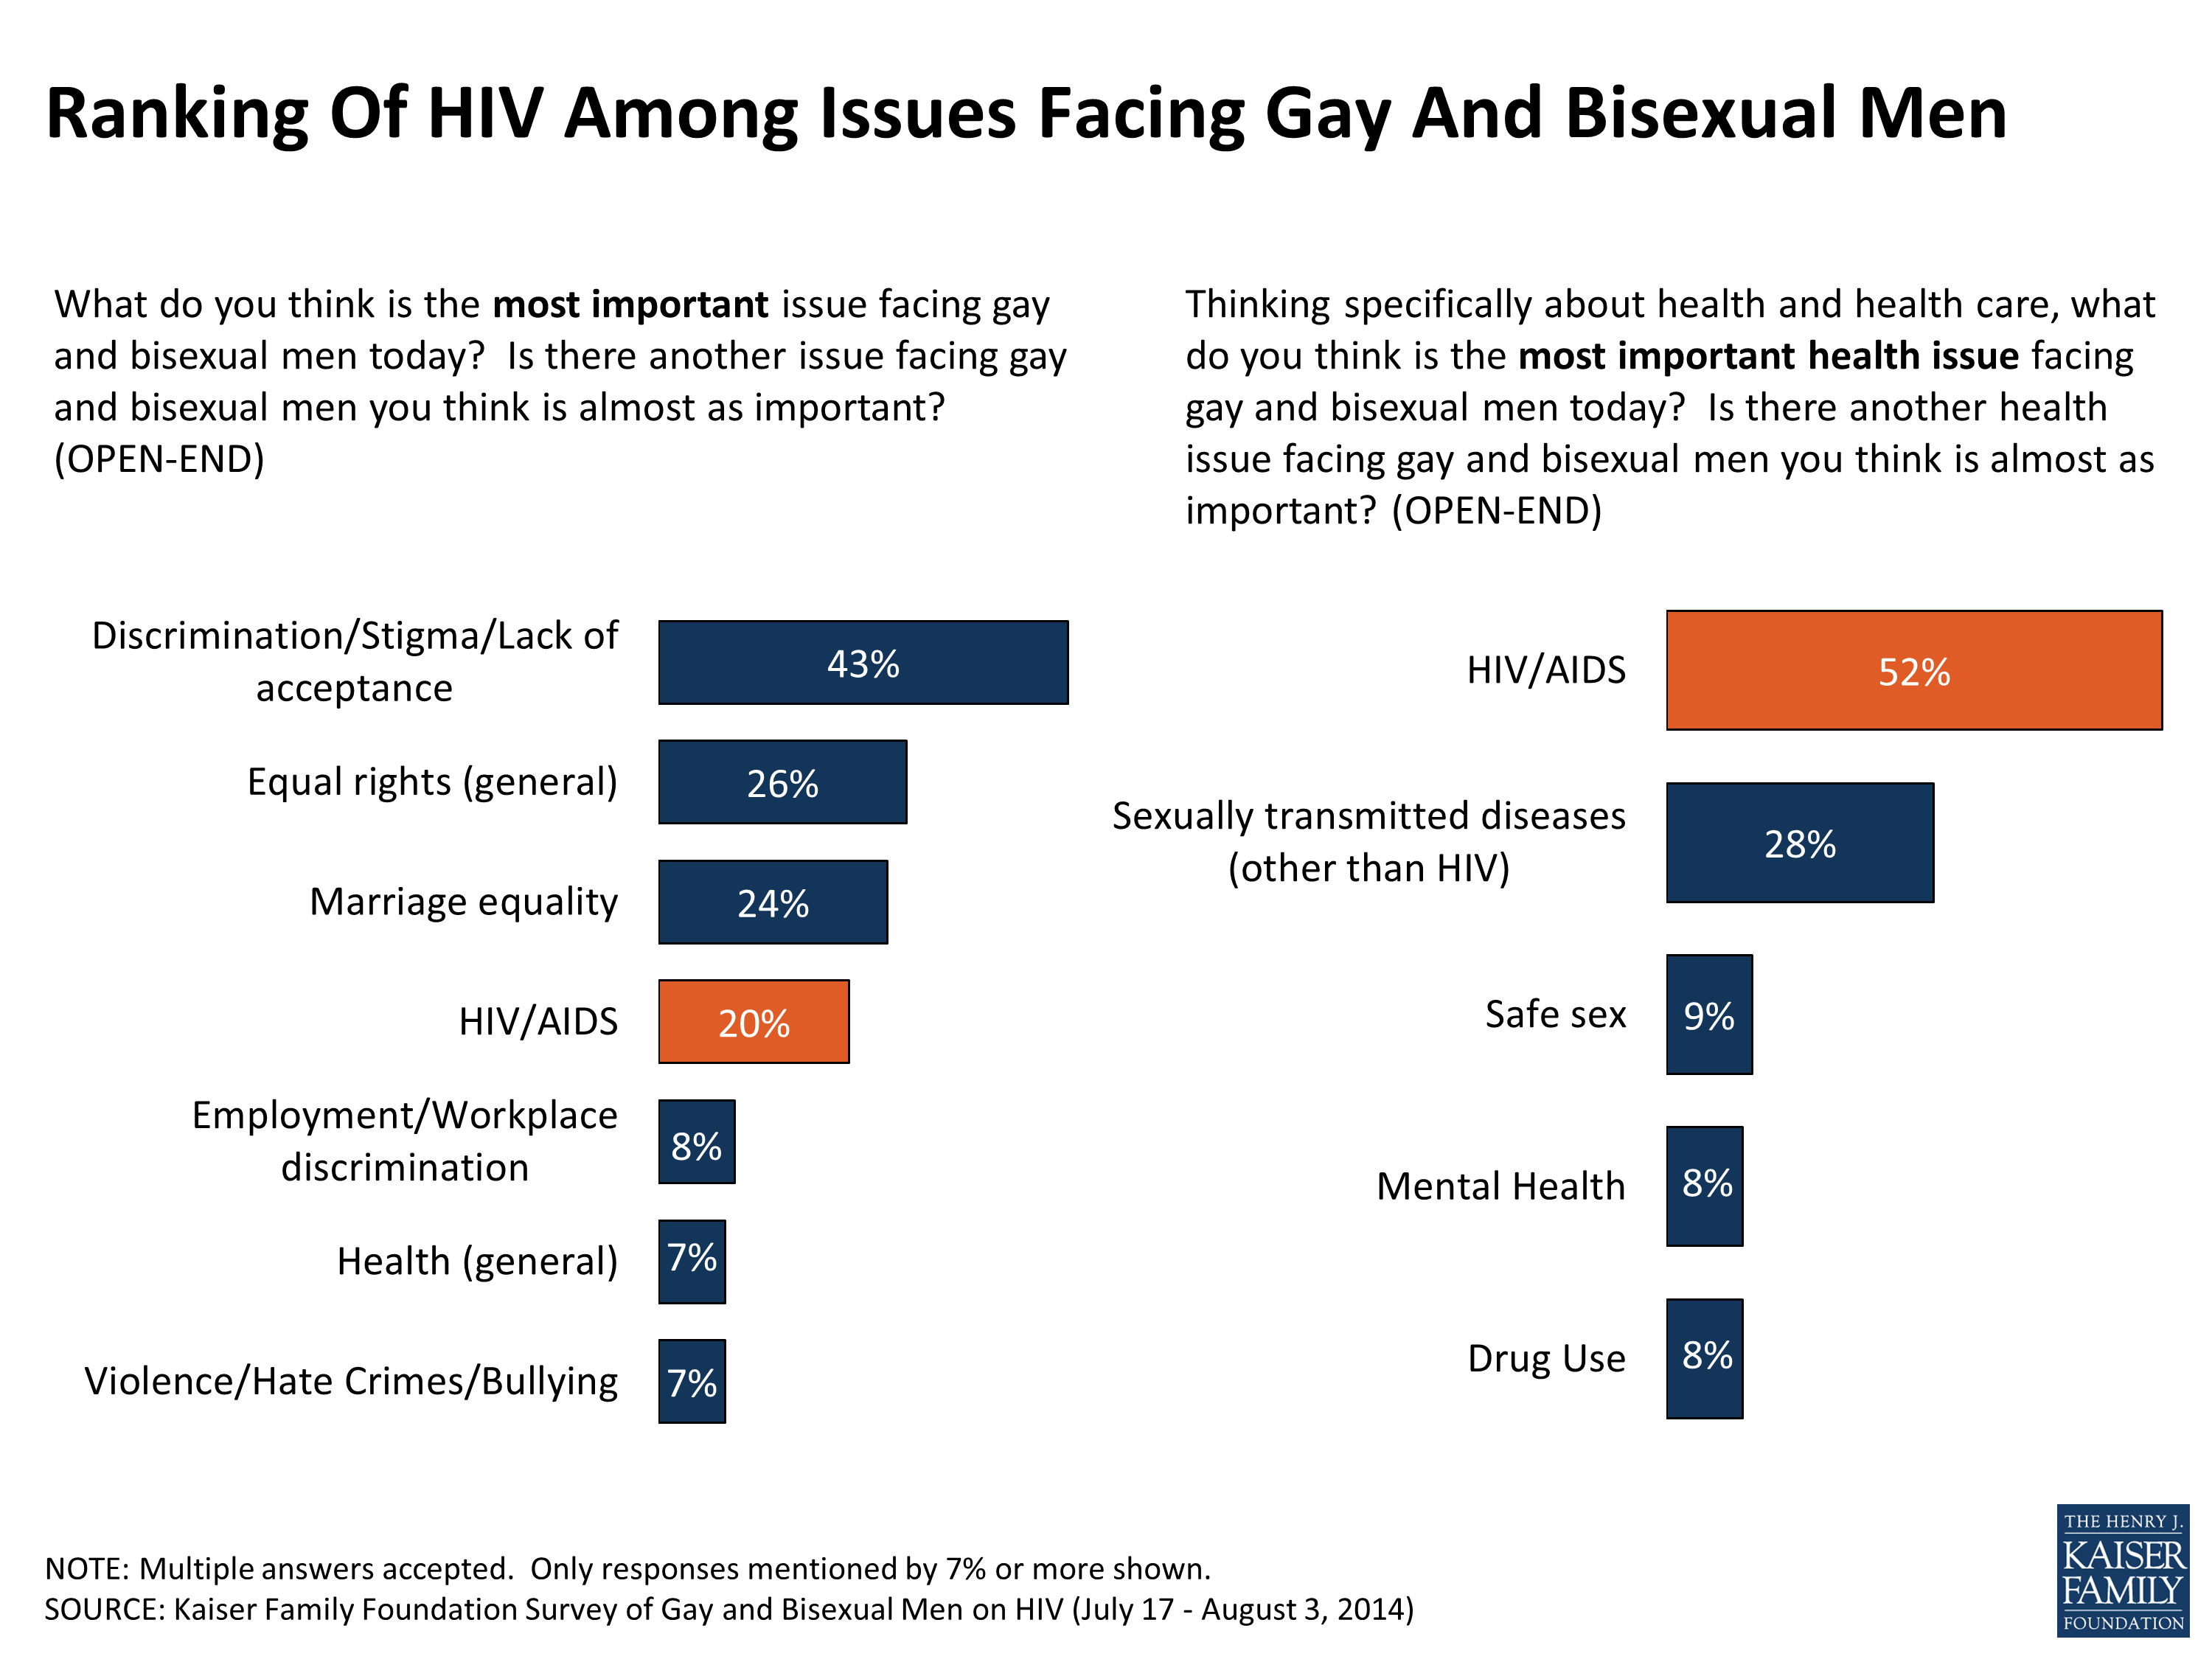 Hiv Aids In The Lives Of Gay And Bisexual Men In The United States